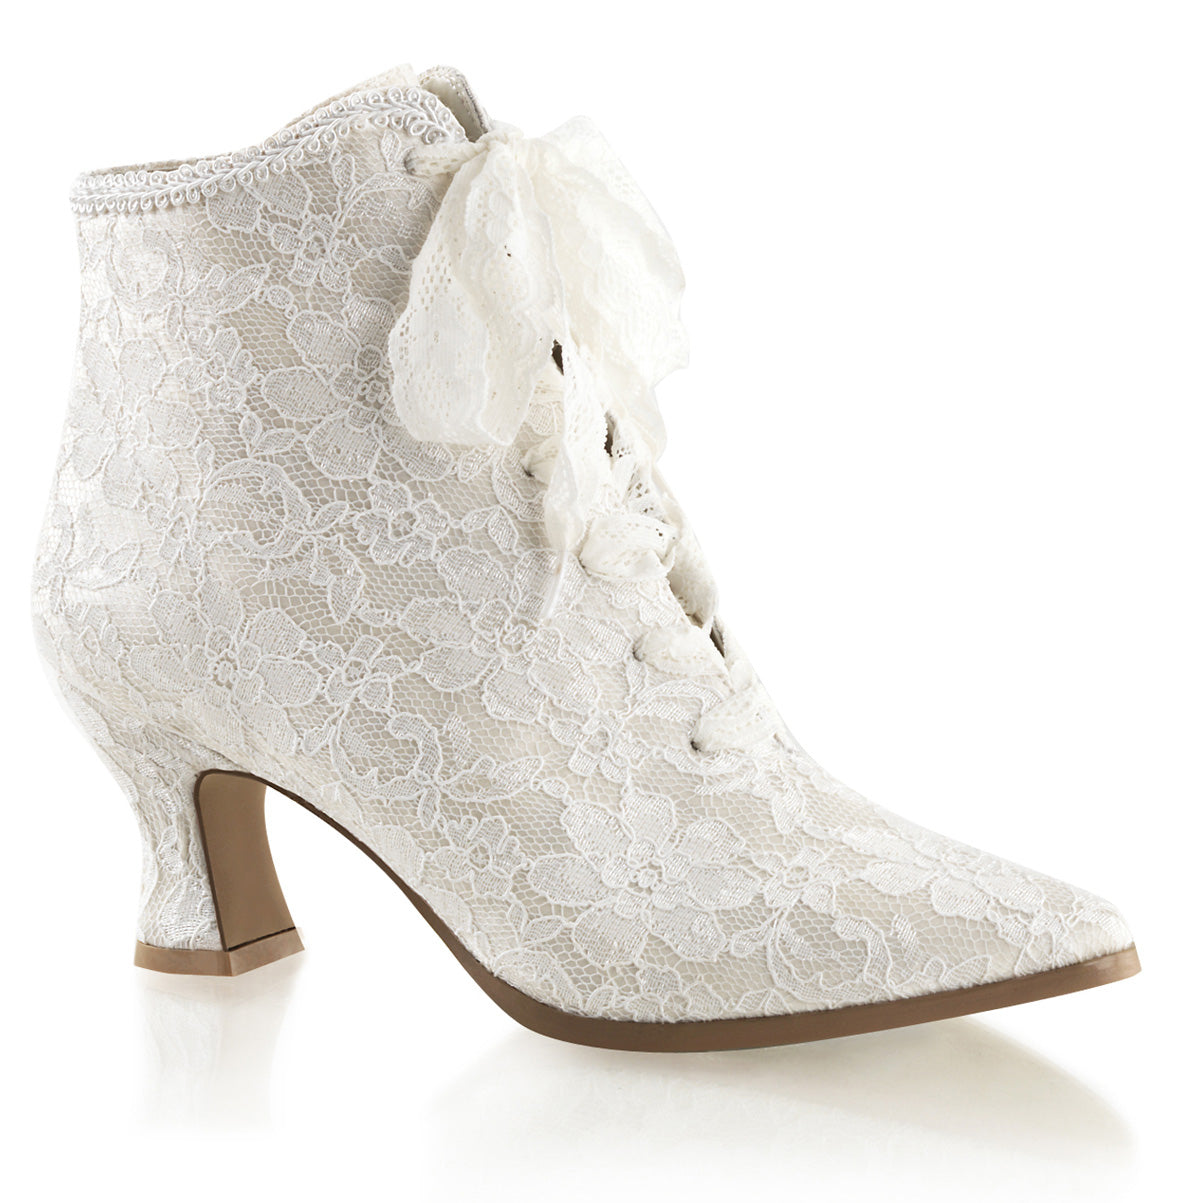 VICTORIAN-30 Fabulicious 3 Inch Heel Ivory Satin Boots